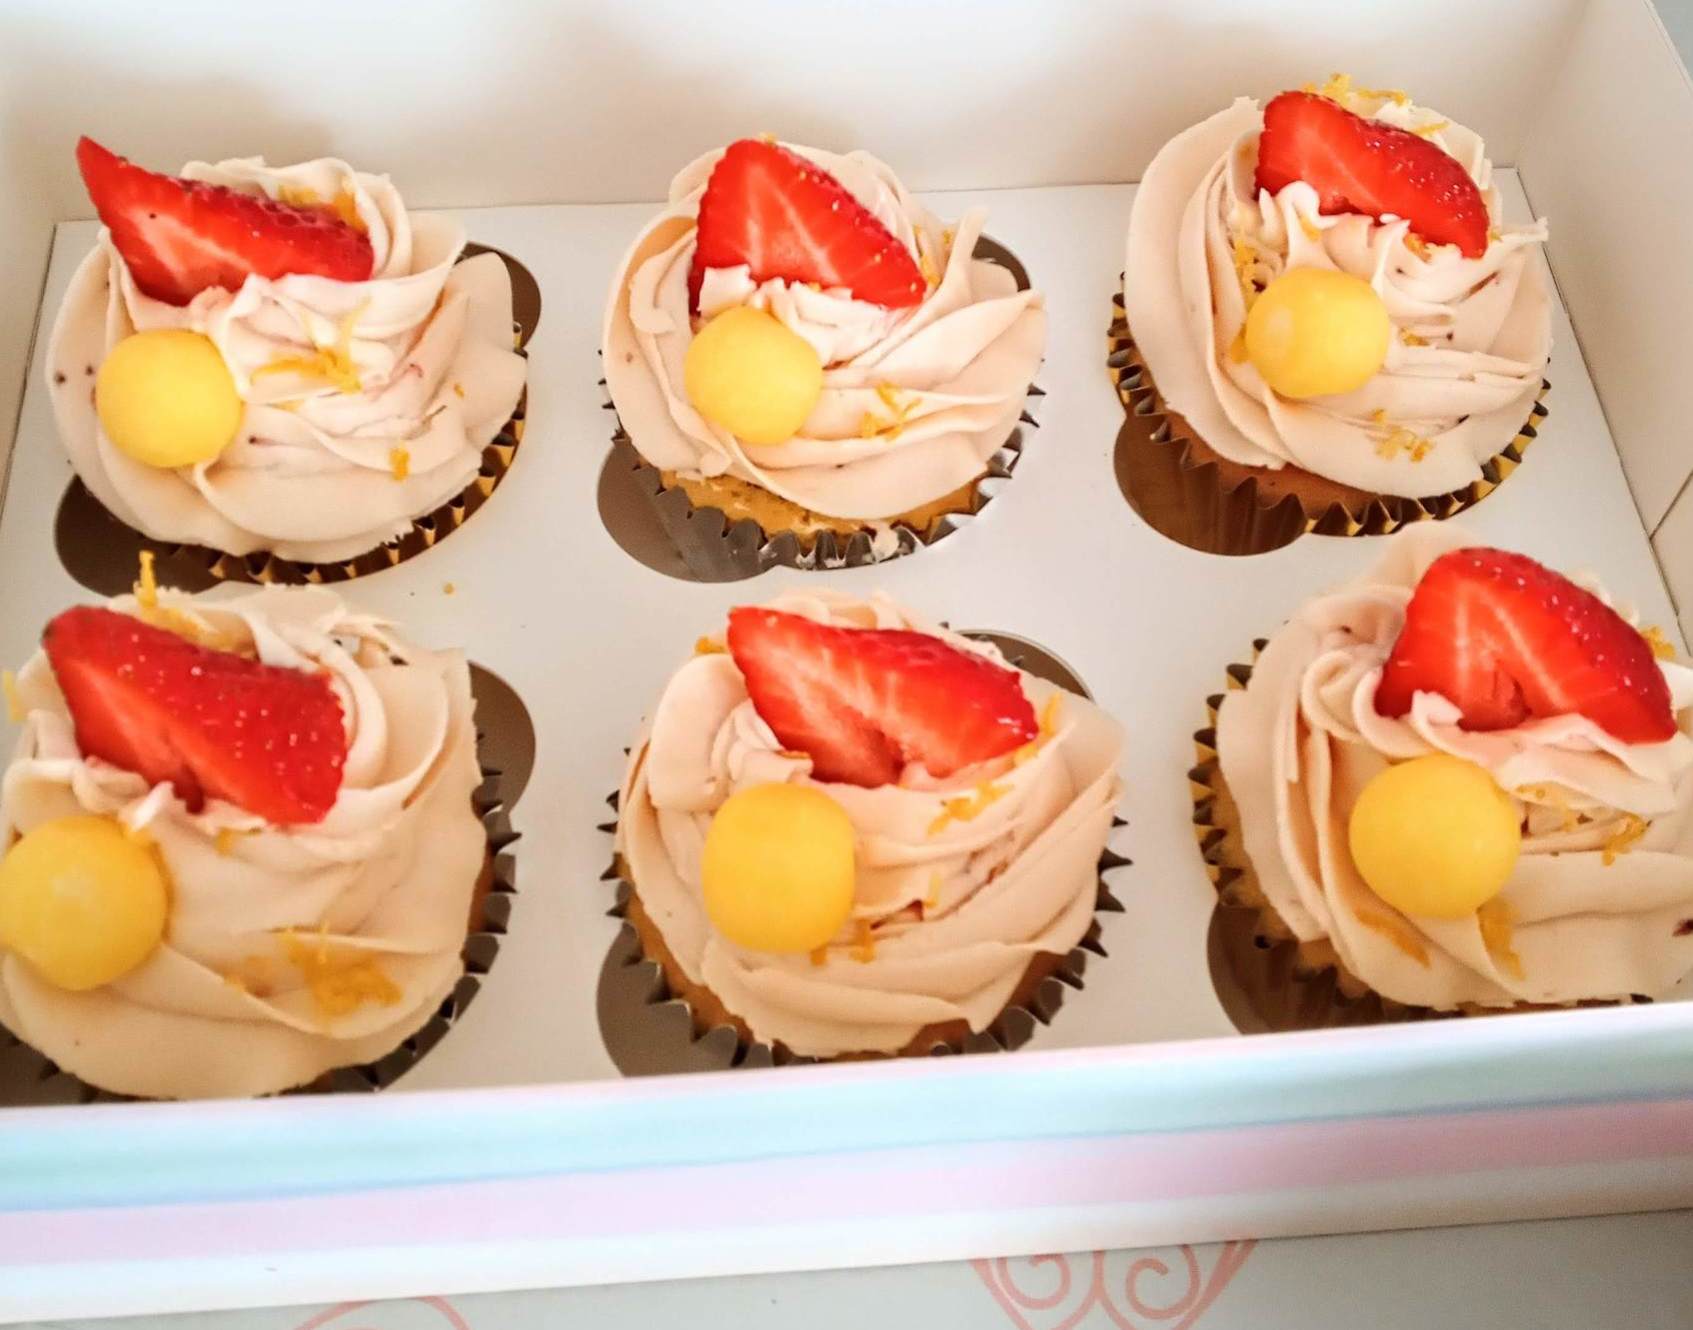 Delicious strawberry and lemon flavoured cupcakes